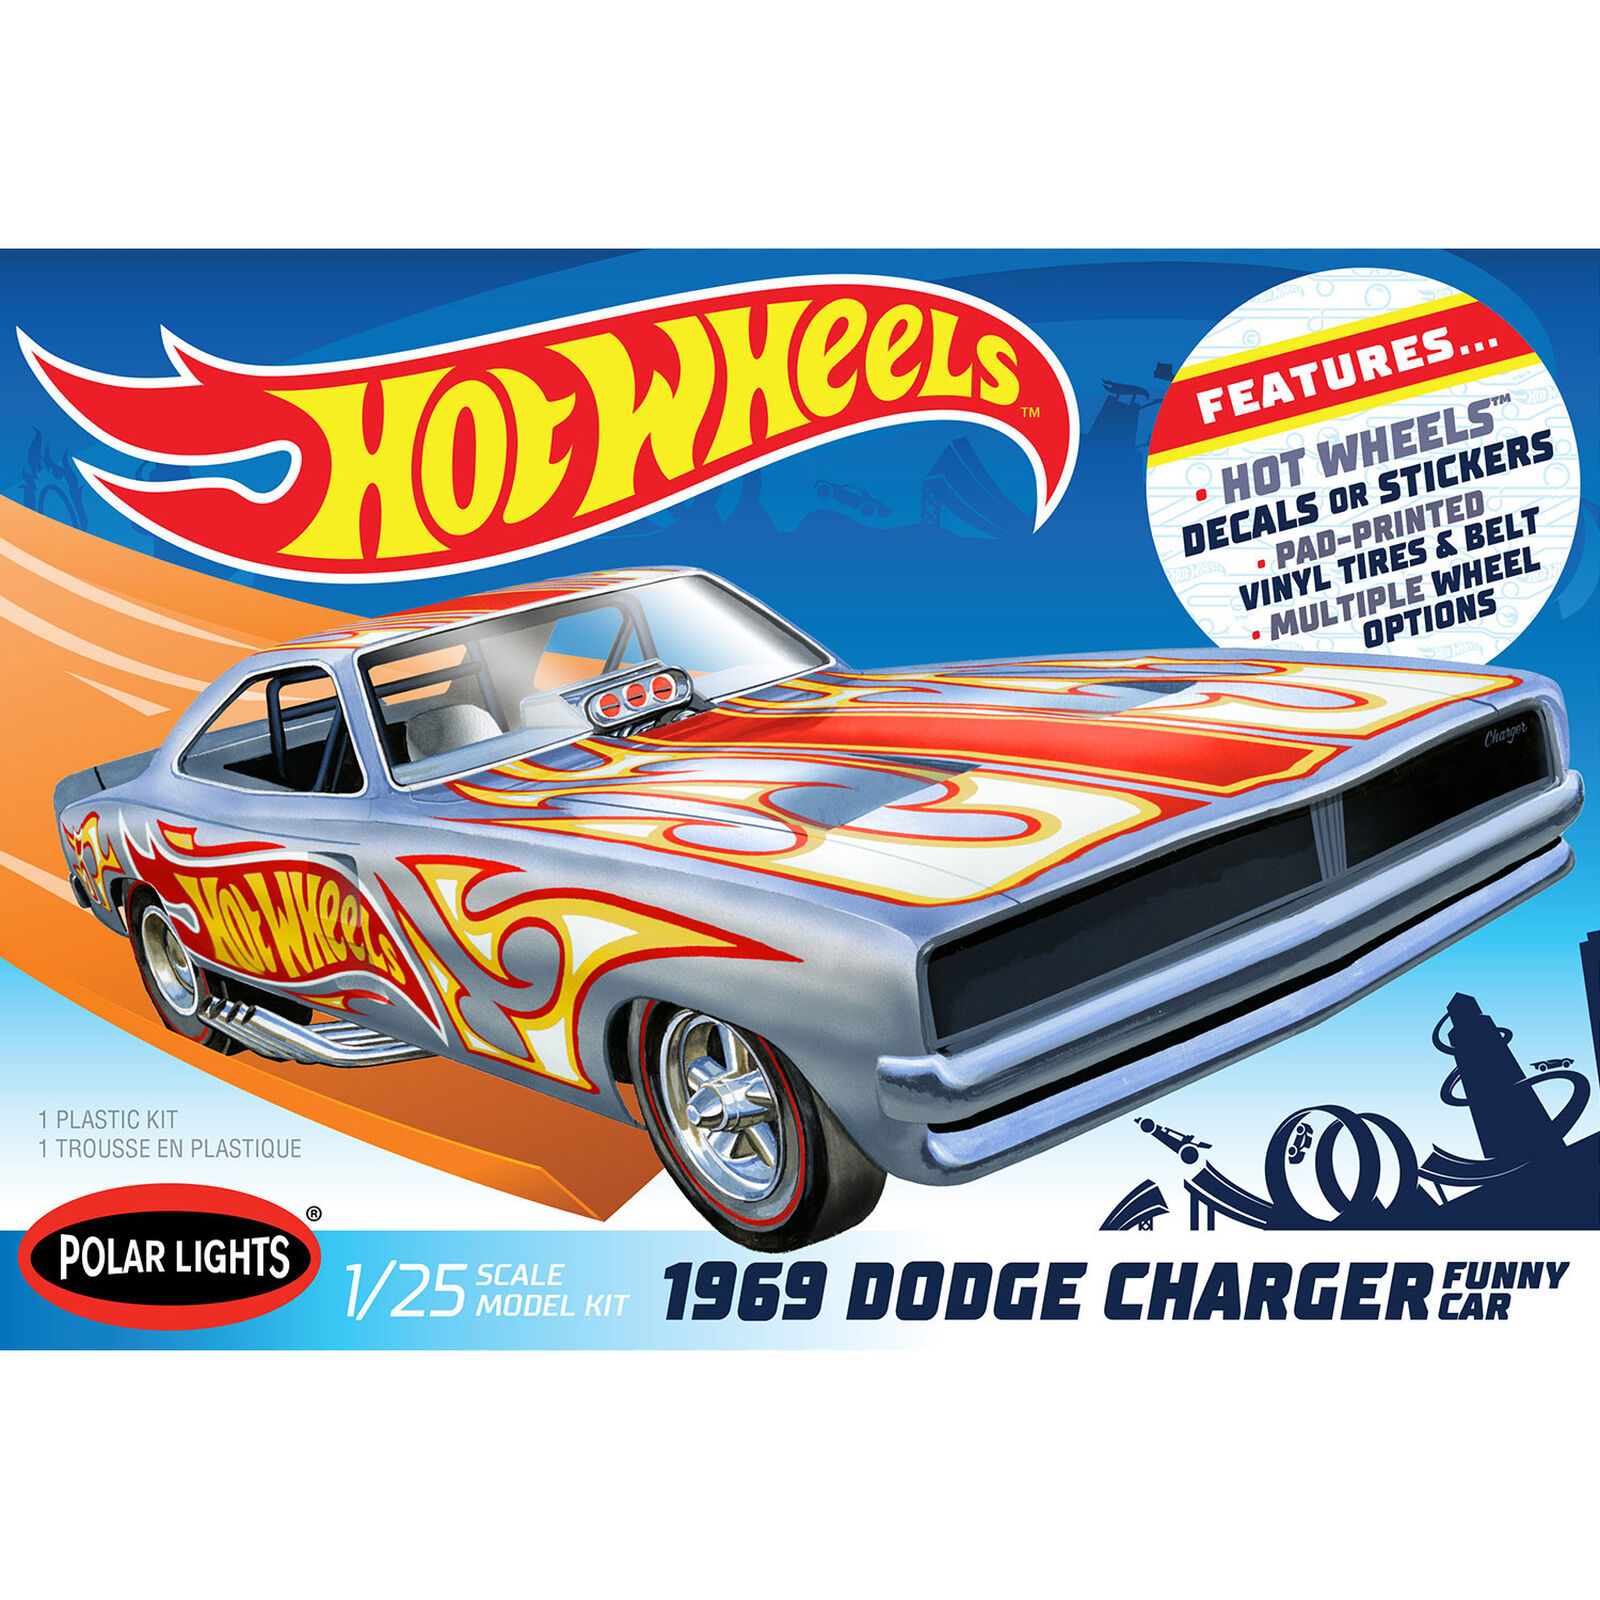 1/25 1969 Dodge Charger Funny Car, Hot Wheels